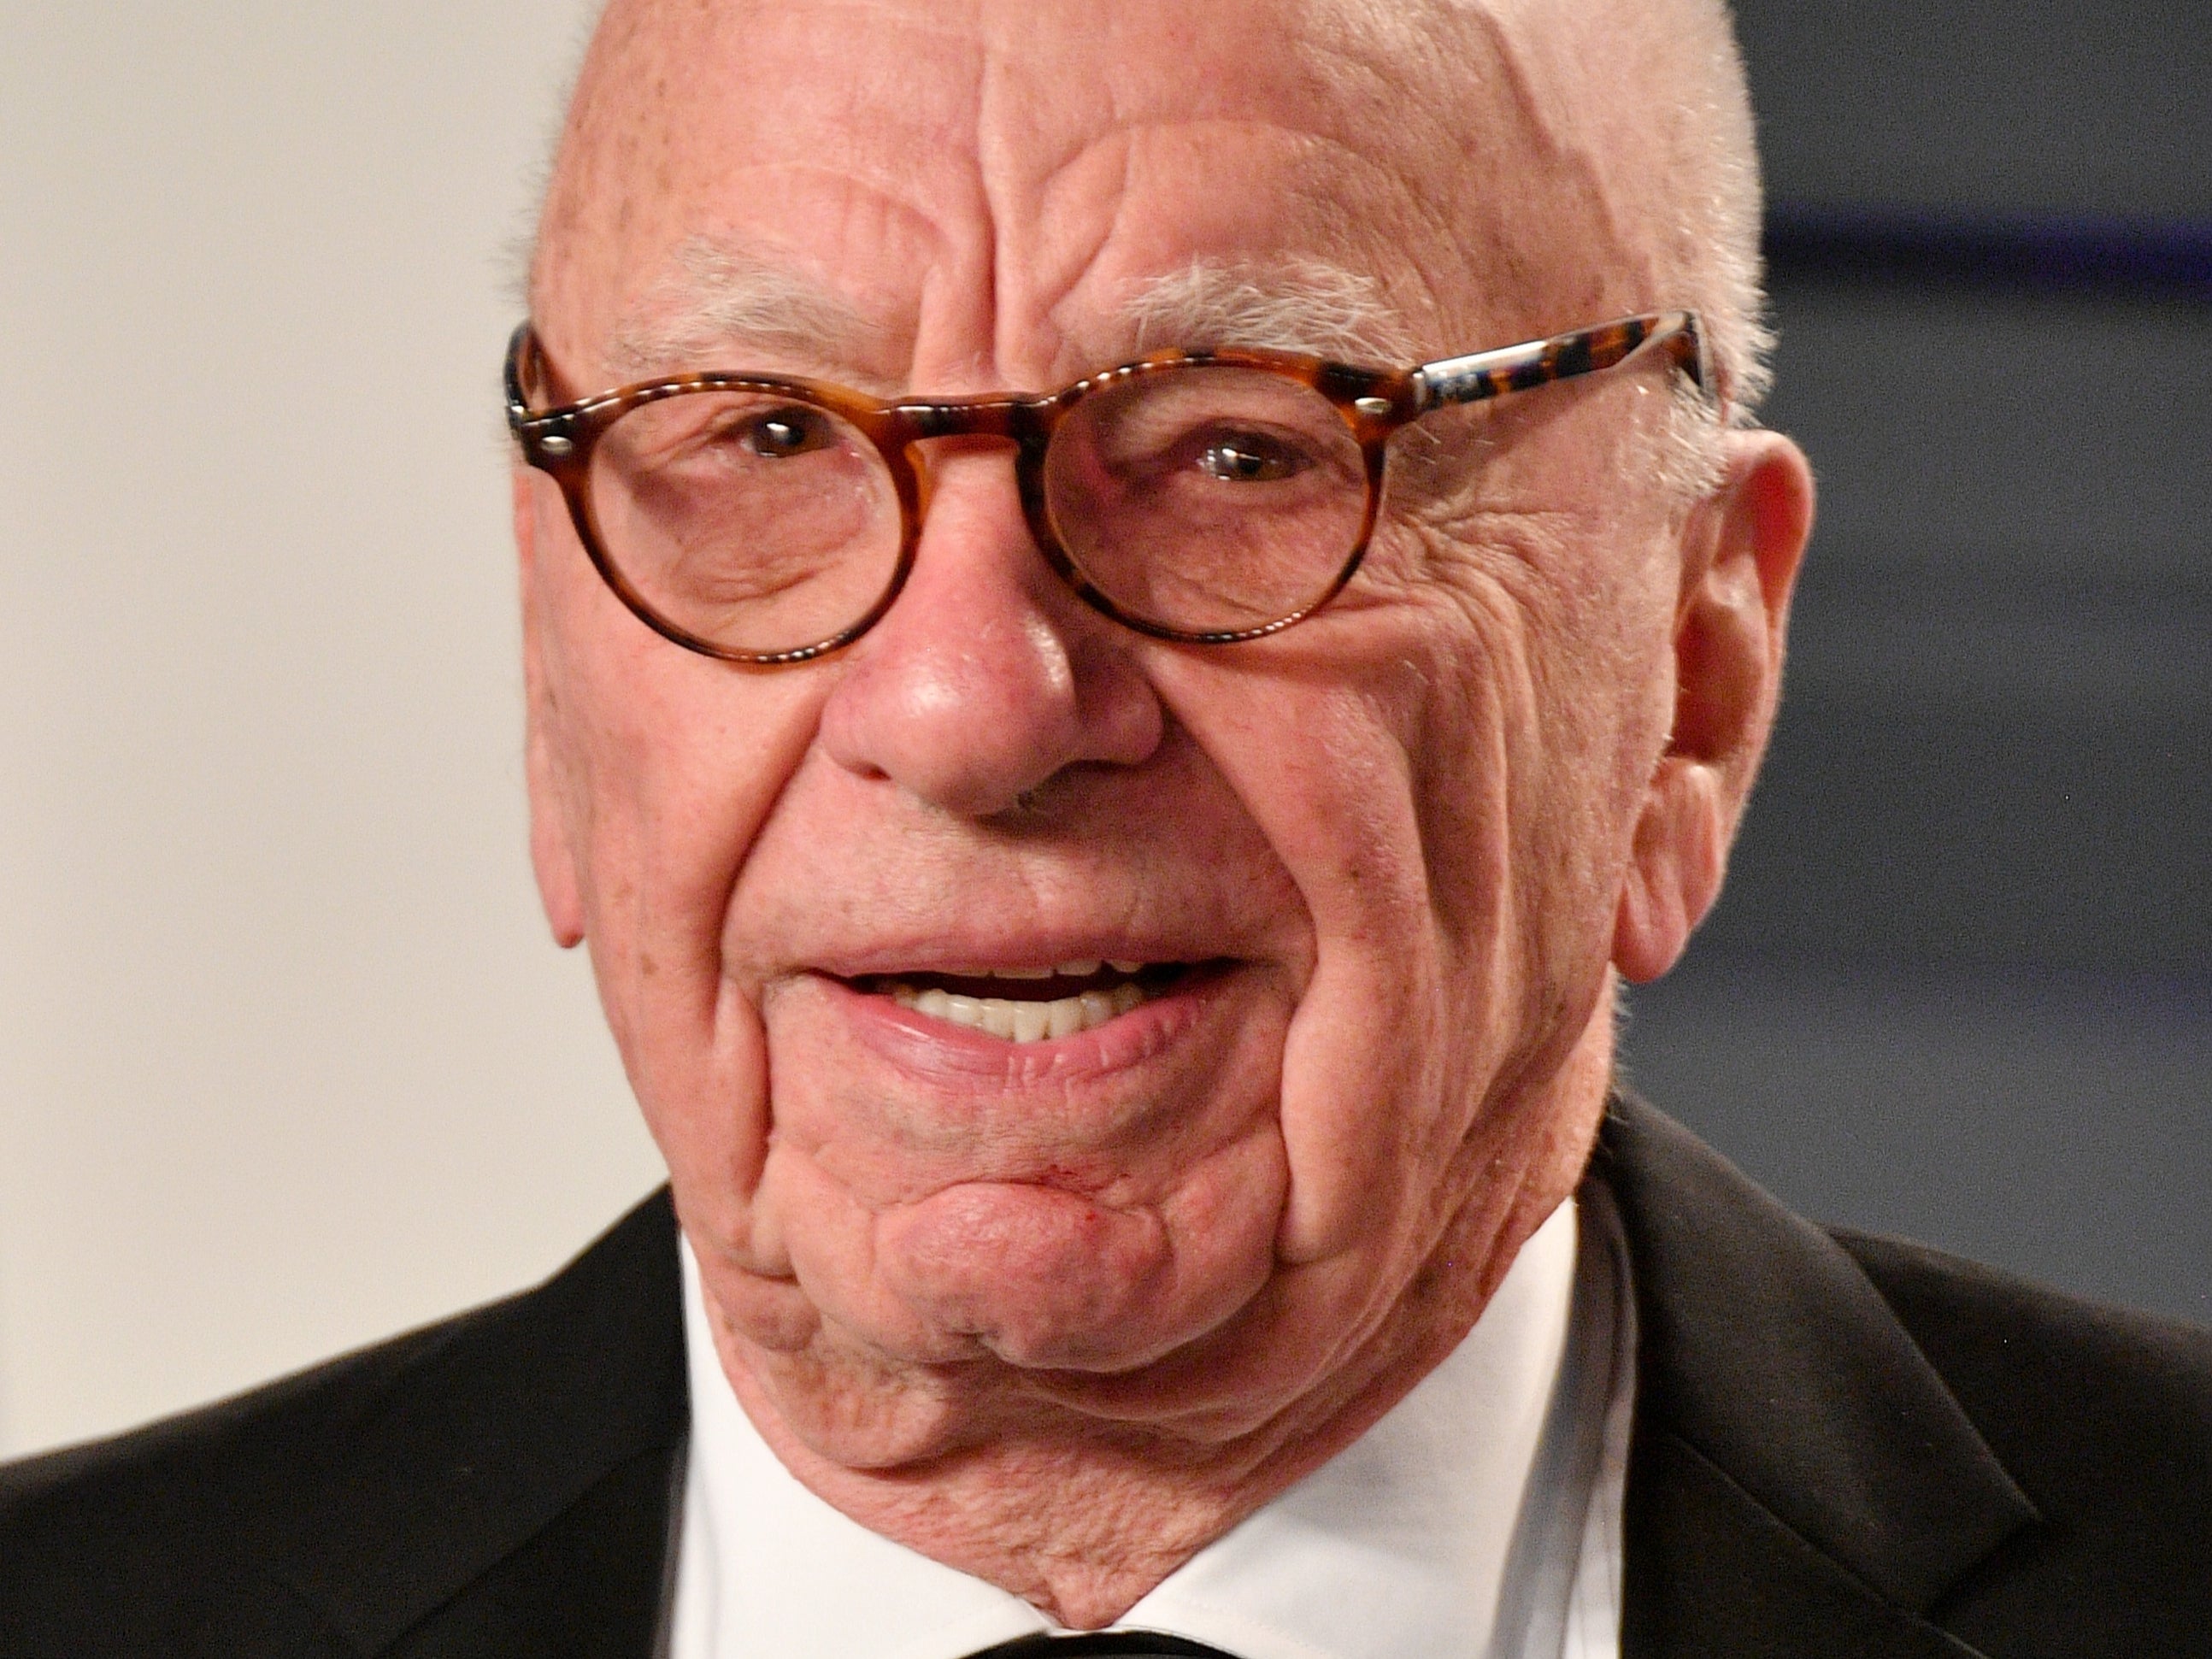 Rupert Murdoch was engaged six times and married five times.